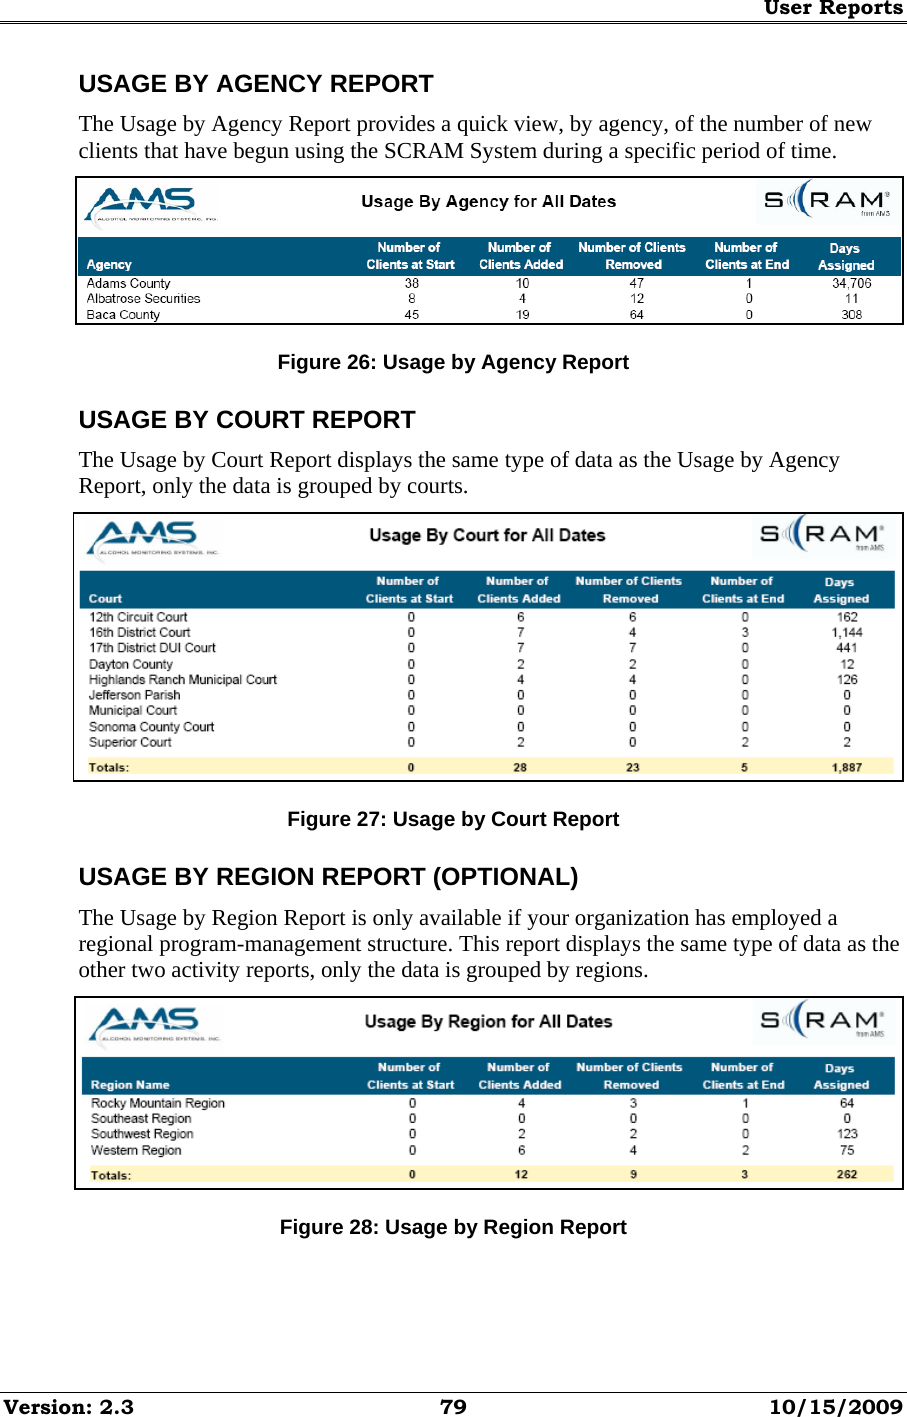 User Reports Version: 2.3  79  10/15/2009 USAGE BY AGENCY REPORT The Usage by Agency Report provides a quick view, by agency, of the number of new clients that have begun using the SCRAM System during a specific period of time.  Figure 26: Usage by Agency Report USAGE BY COURT REPORT The Usage by Court Report displays the same type of data as the Usage by Agency Report, only the data is grouped by courts.  Figure 27: Usage by Court Report USAGE BY REGION REPORT (OPTIONAL) The Usage by Region Report is only available if your organization has employed a regional program-management structure. This report displays the same type of data as the other two activity reports, only the data is grouped by regions.  Figure 28: Usage by Region Report 